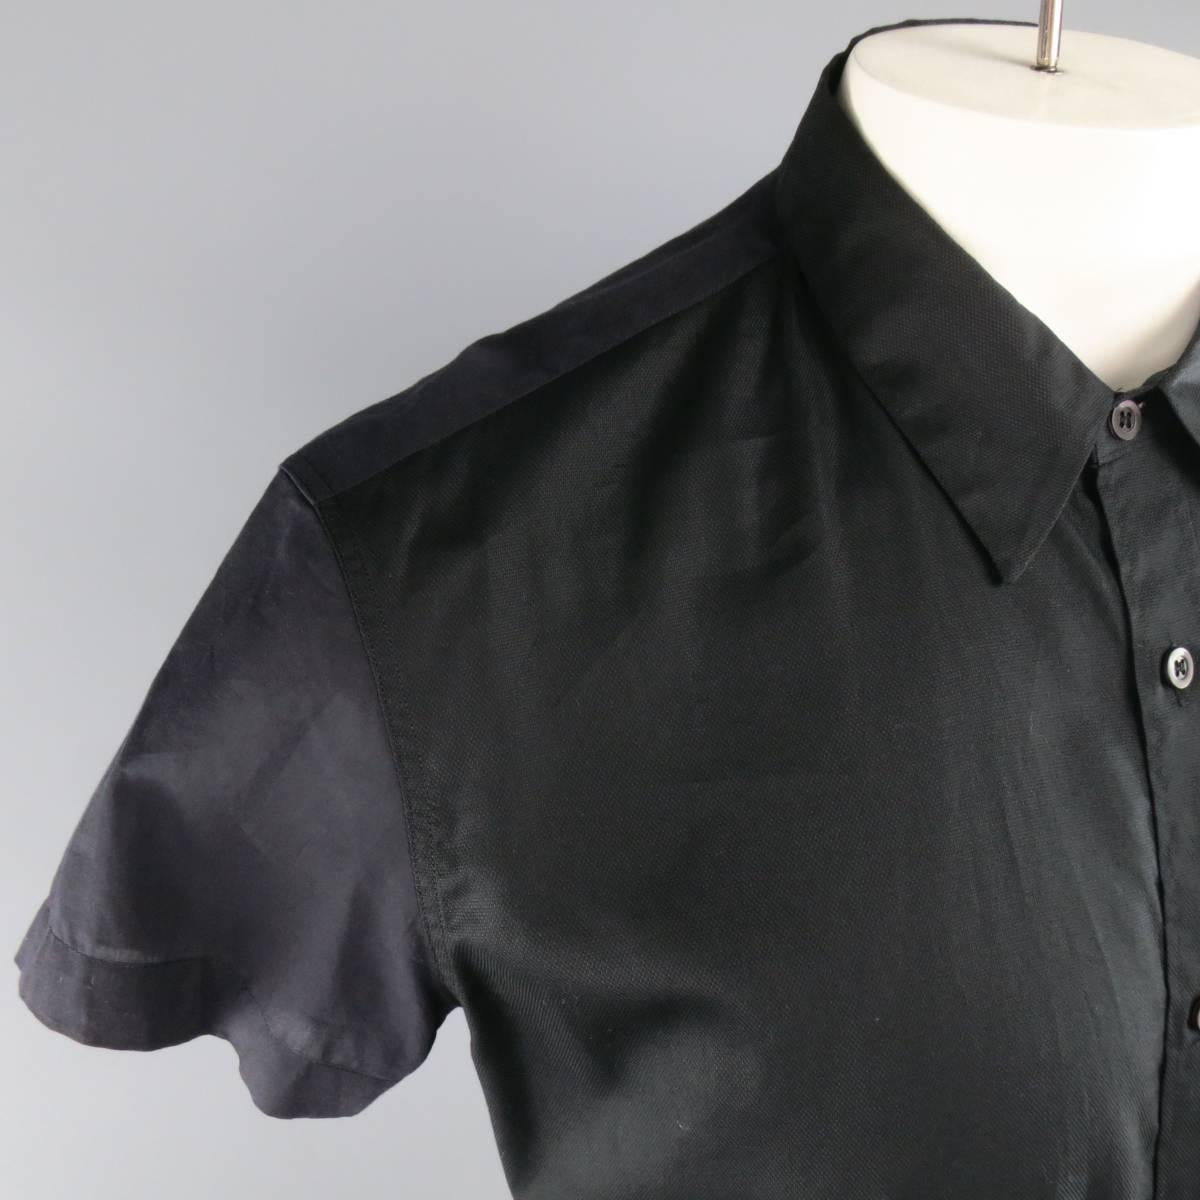 DRIES VAN NOTEN short sleeve shirt features a textured front with pointed collar and semi sheer back.
 
Excellent Pre-Owned Condition.
Marked: IT 52
 
Measurements:
 
Shoulder: 18 in.
Chest: 46 in.
Sleeve: 6 in.
Length: 28 in.